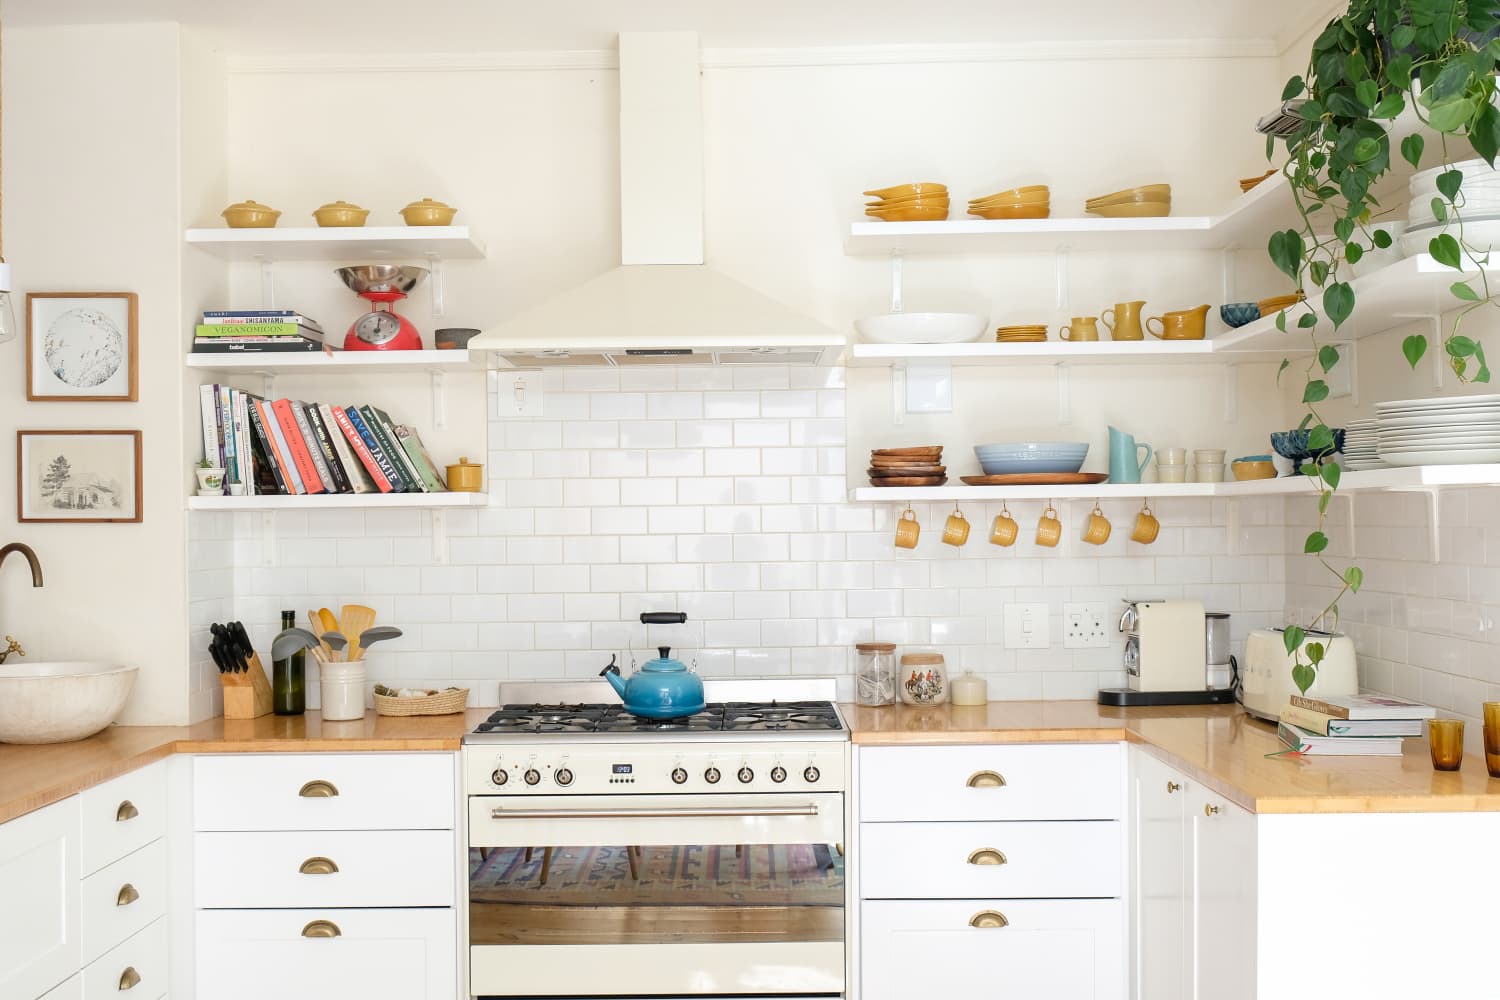 5 Things Pro Organizers Would Never (Ever!) Get Rid of in the Kitchen